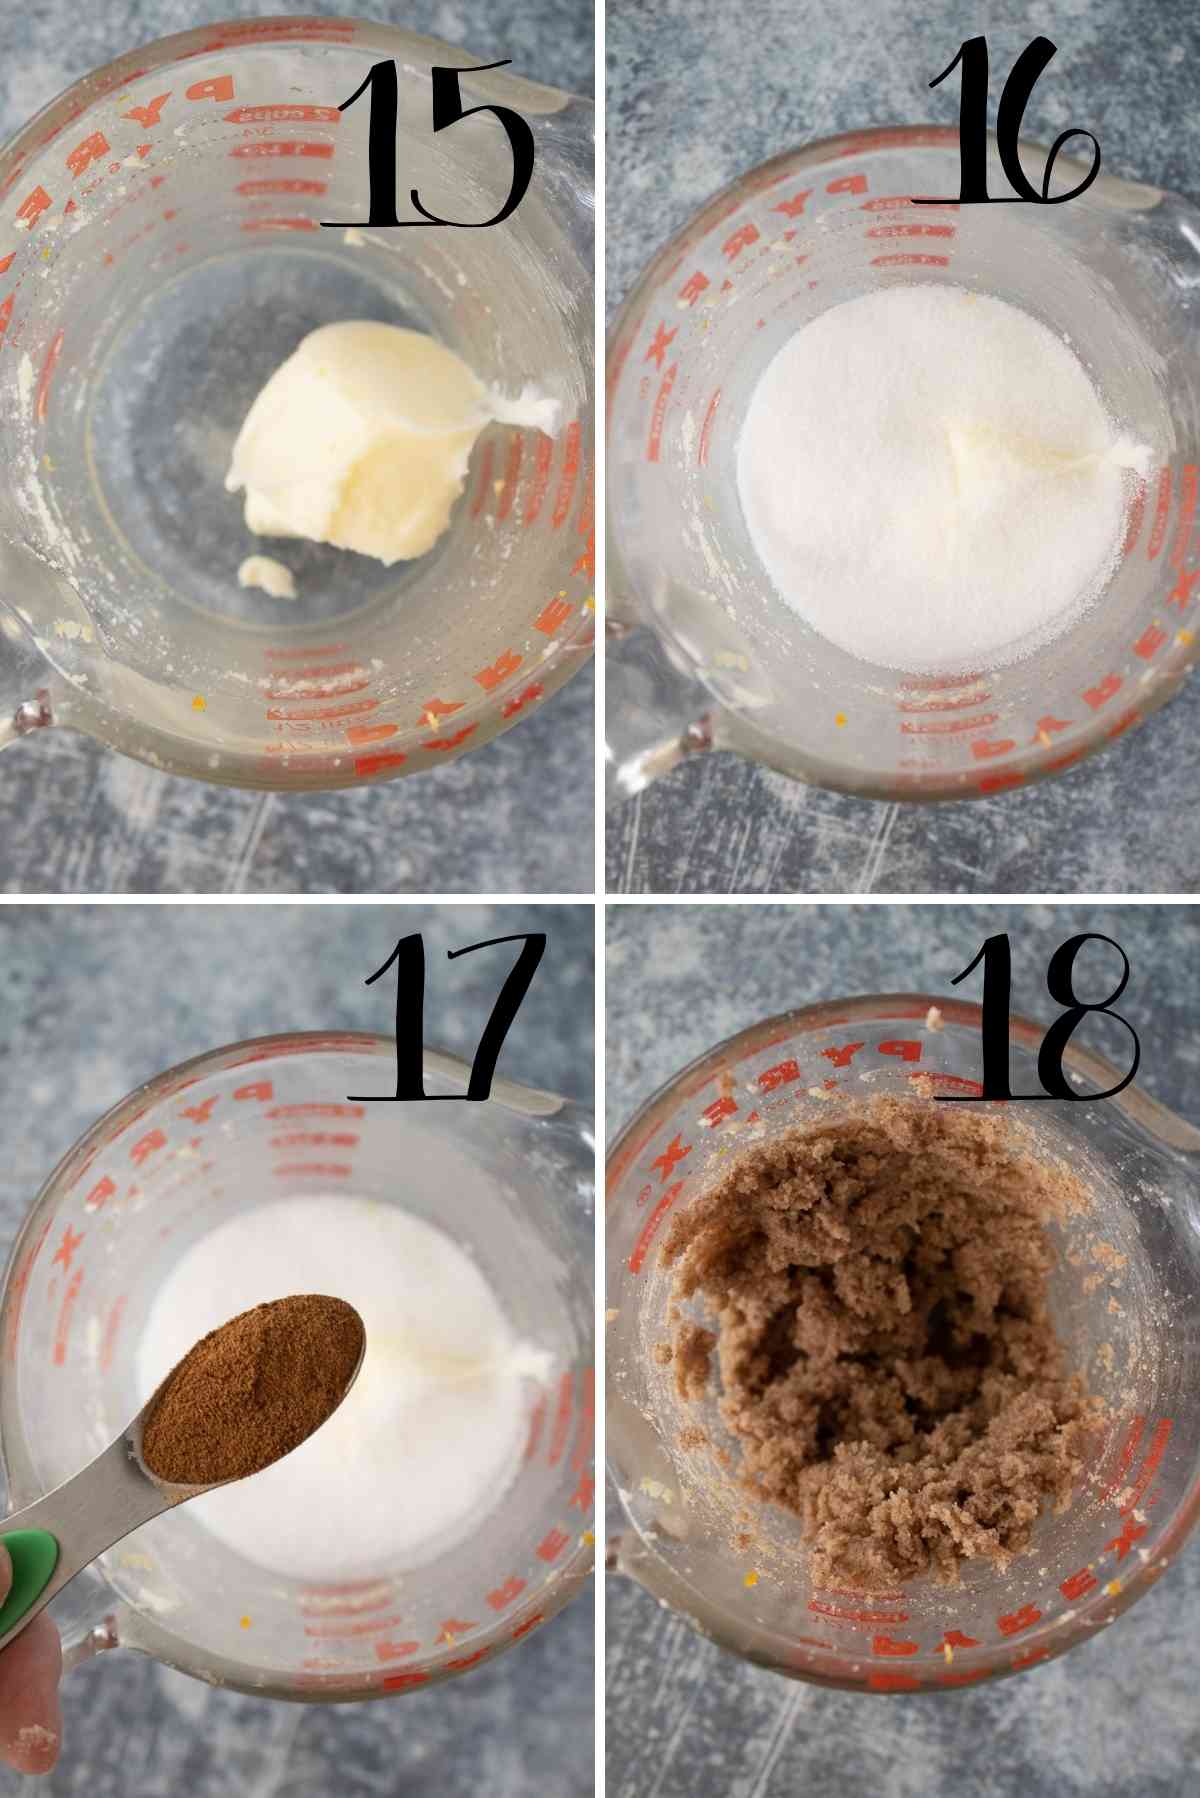 Mix up the sweet cinnamon roll filling.